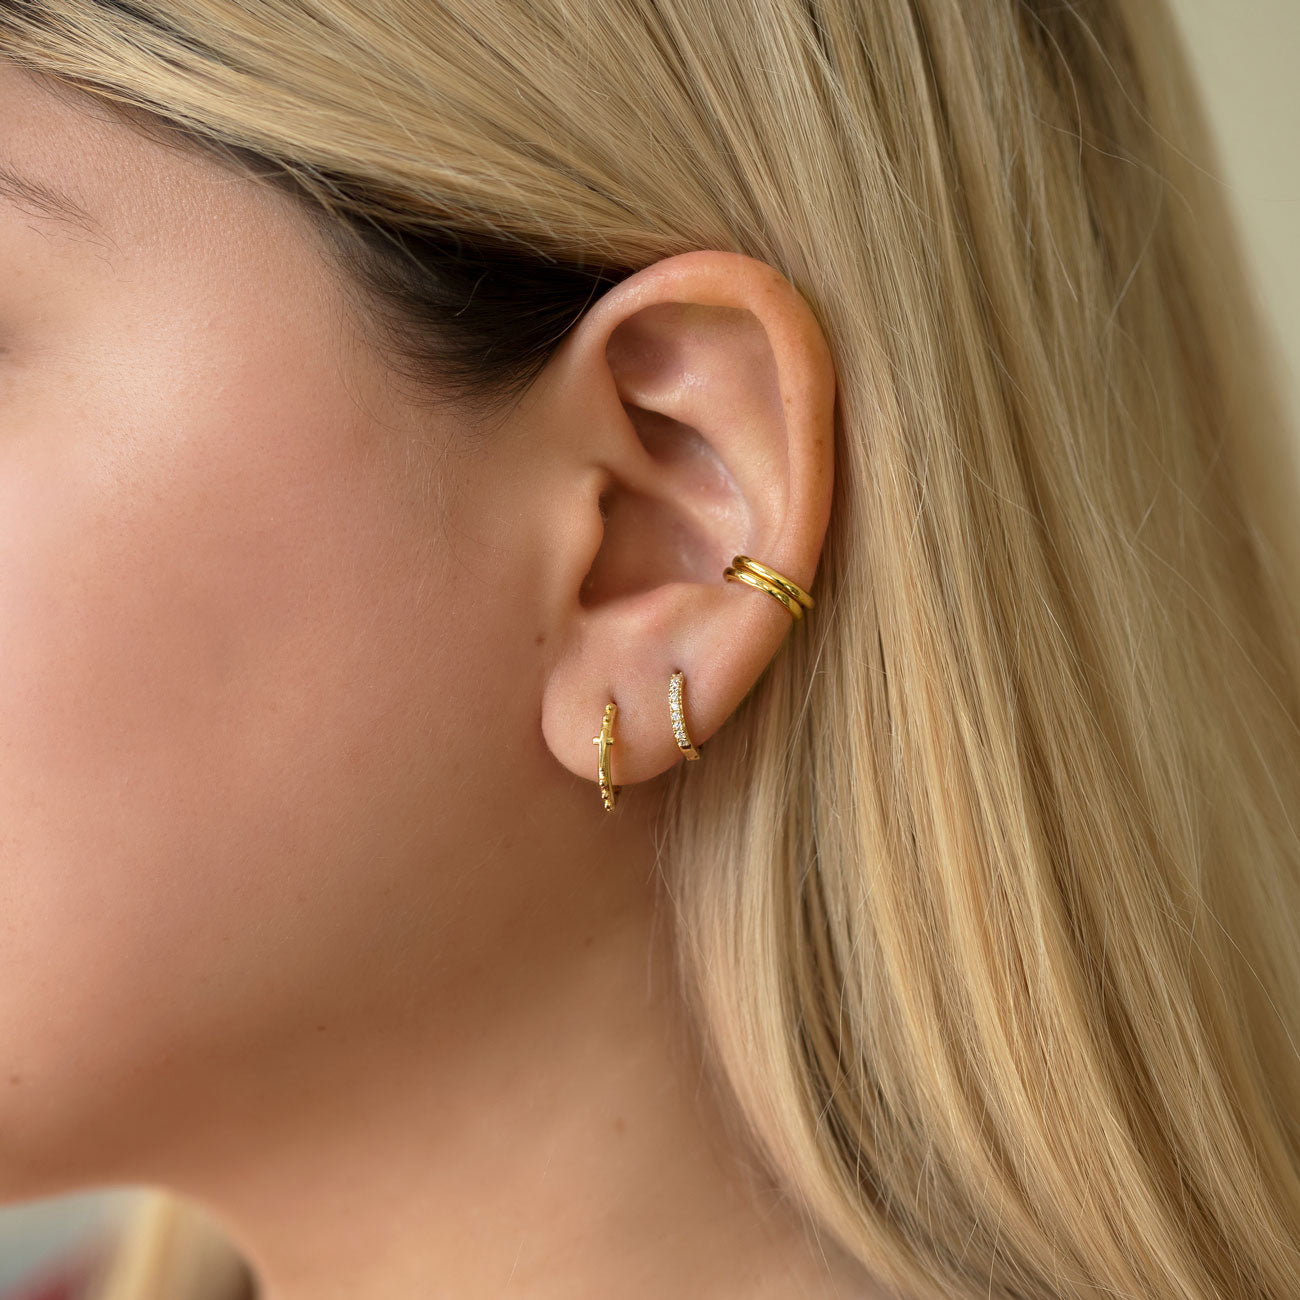 Gold Vermeil Curated Ear with Cross Bead Hoops, Pave Huggie Earrings and Eternity Ear Cuffs